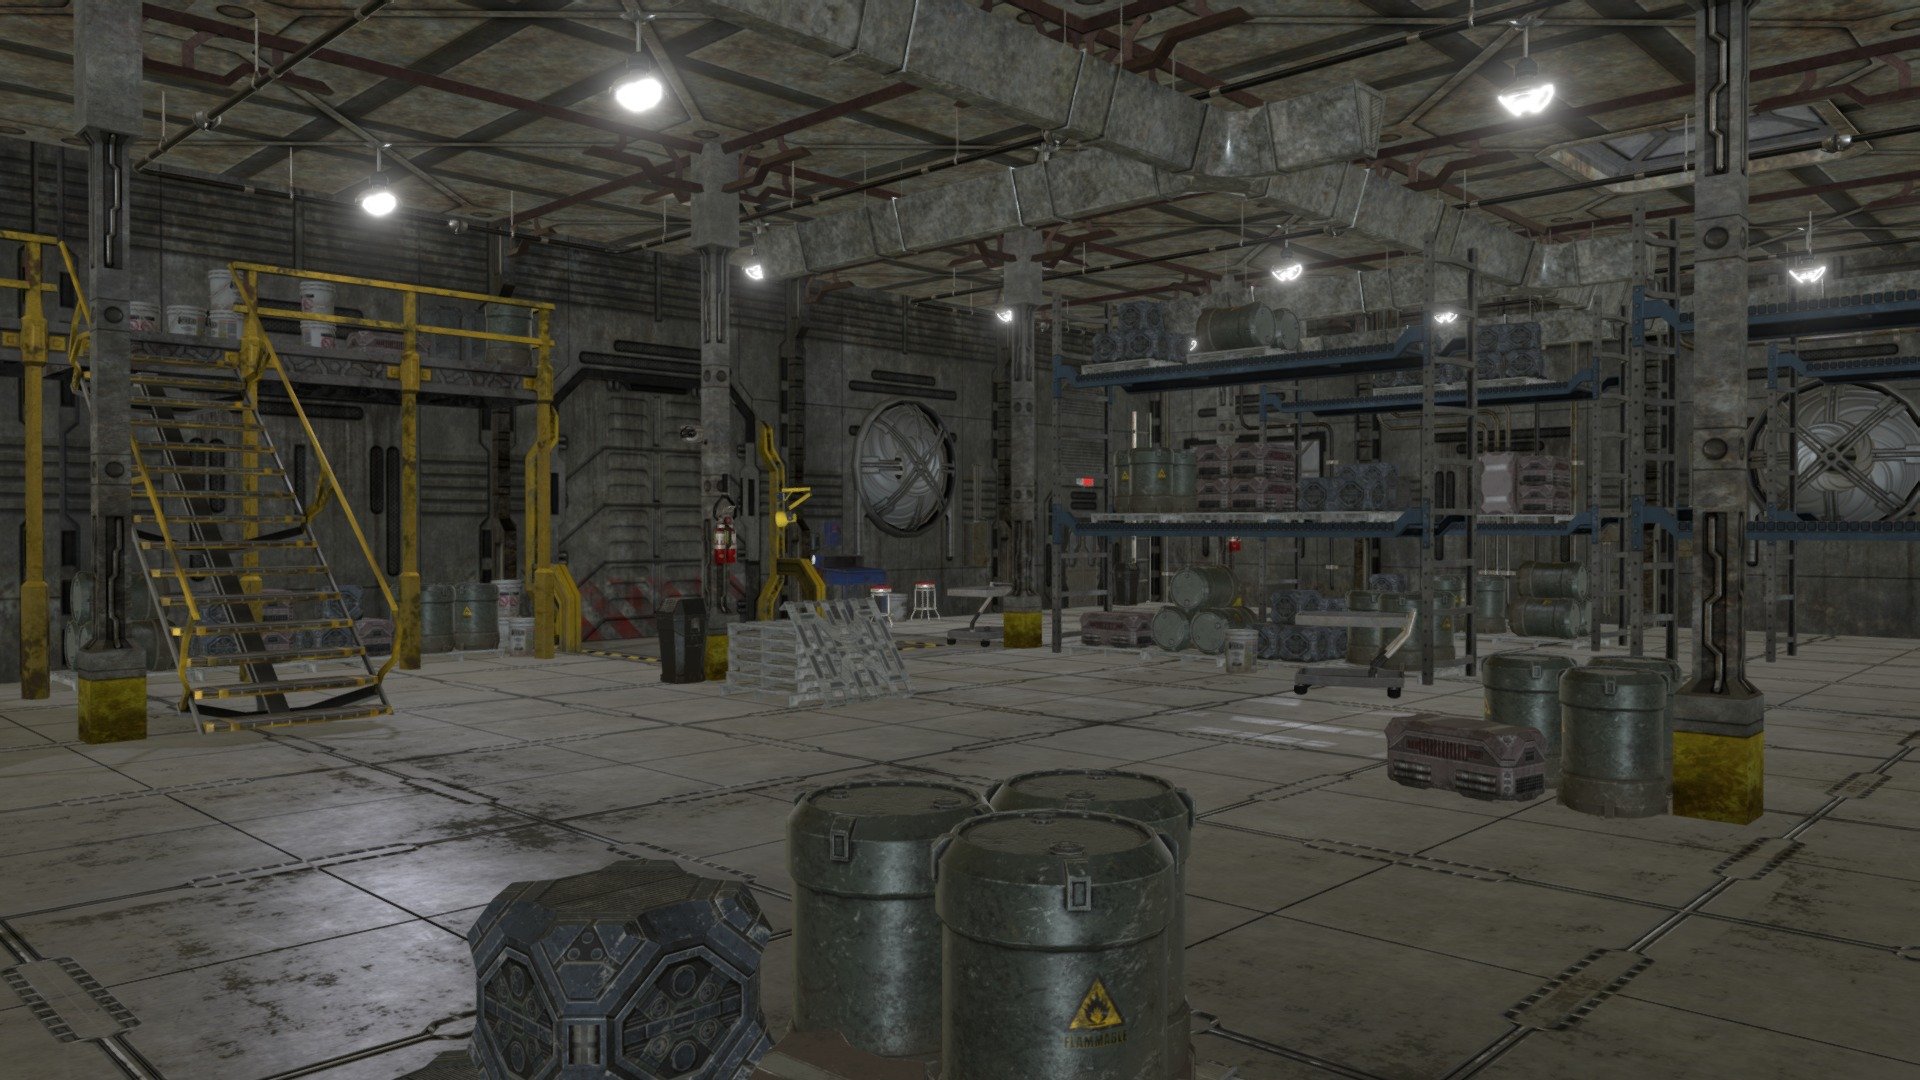 Here's a partial Sci-Fi warehouse scene.  These were assets that were created for a Sci-Fi warehouse pack 3d model